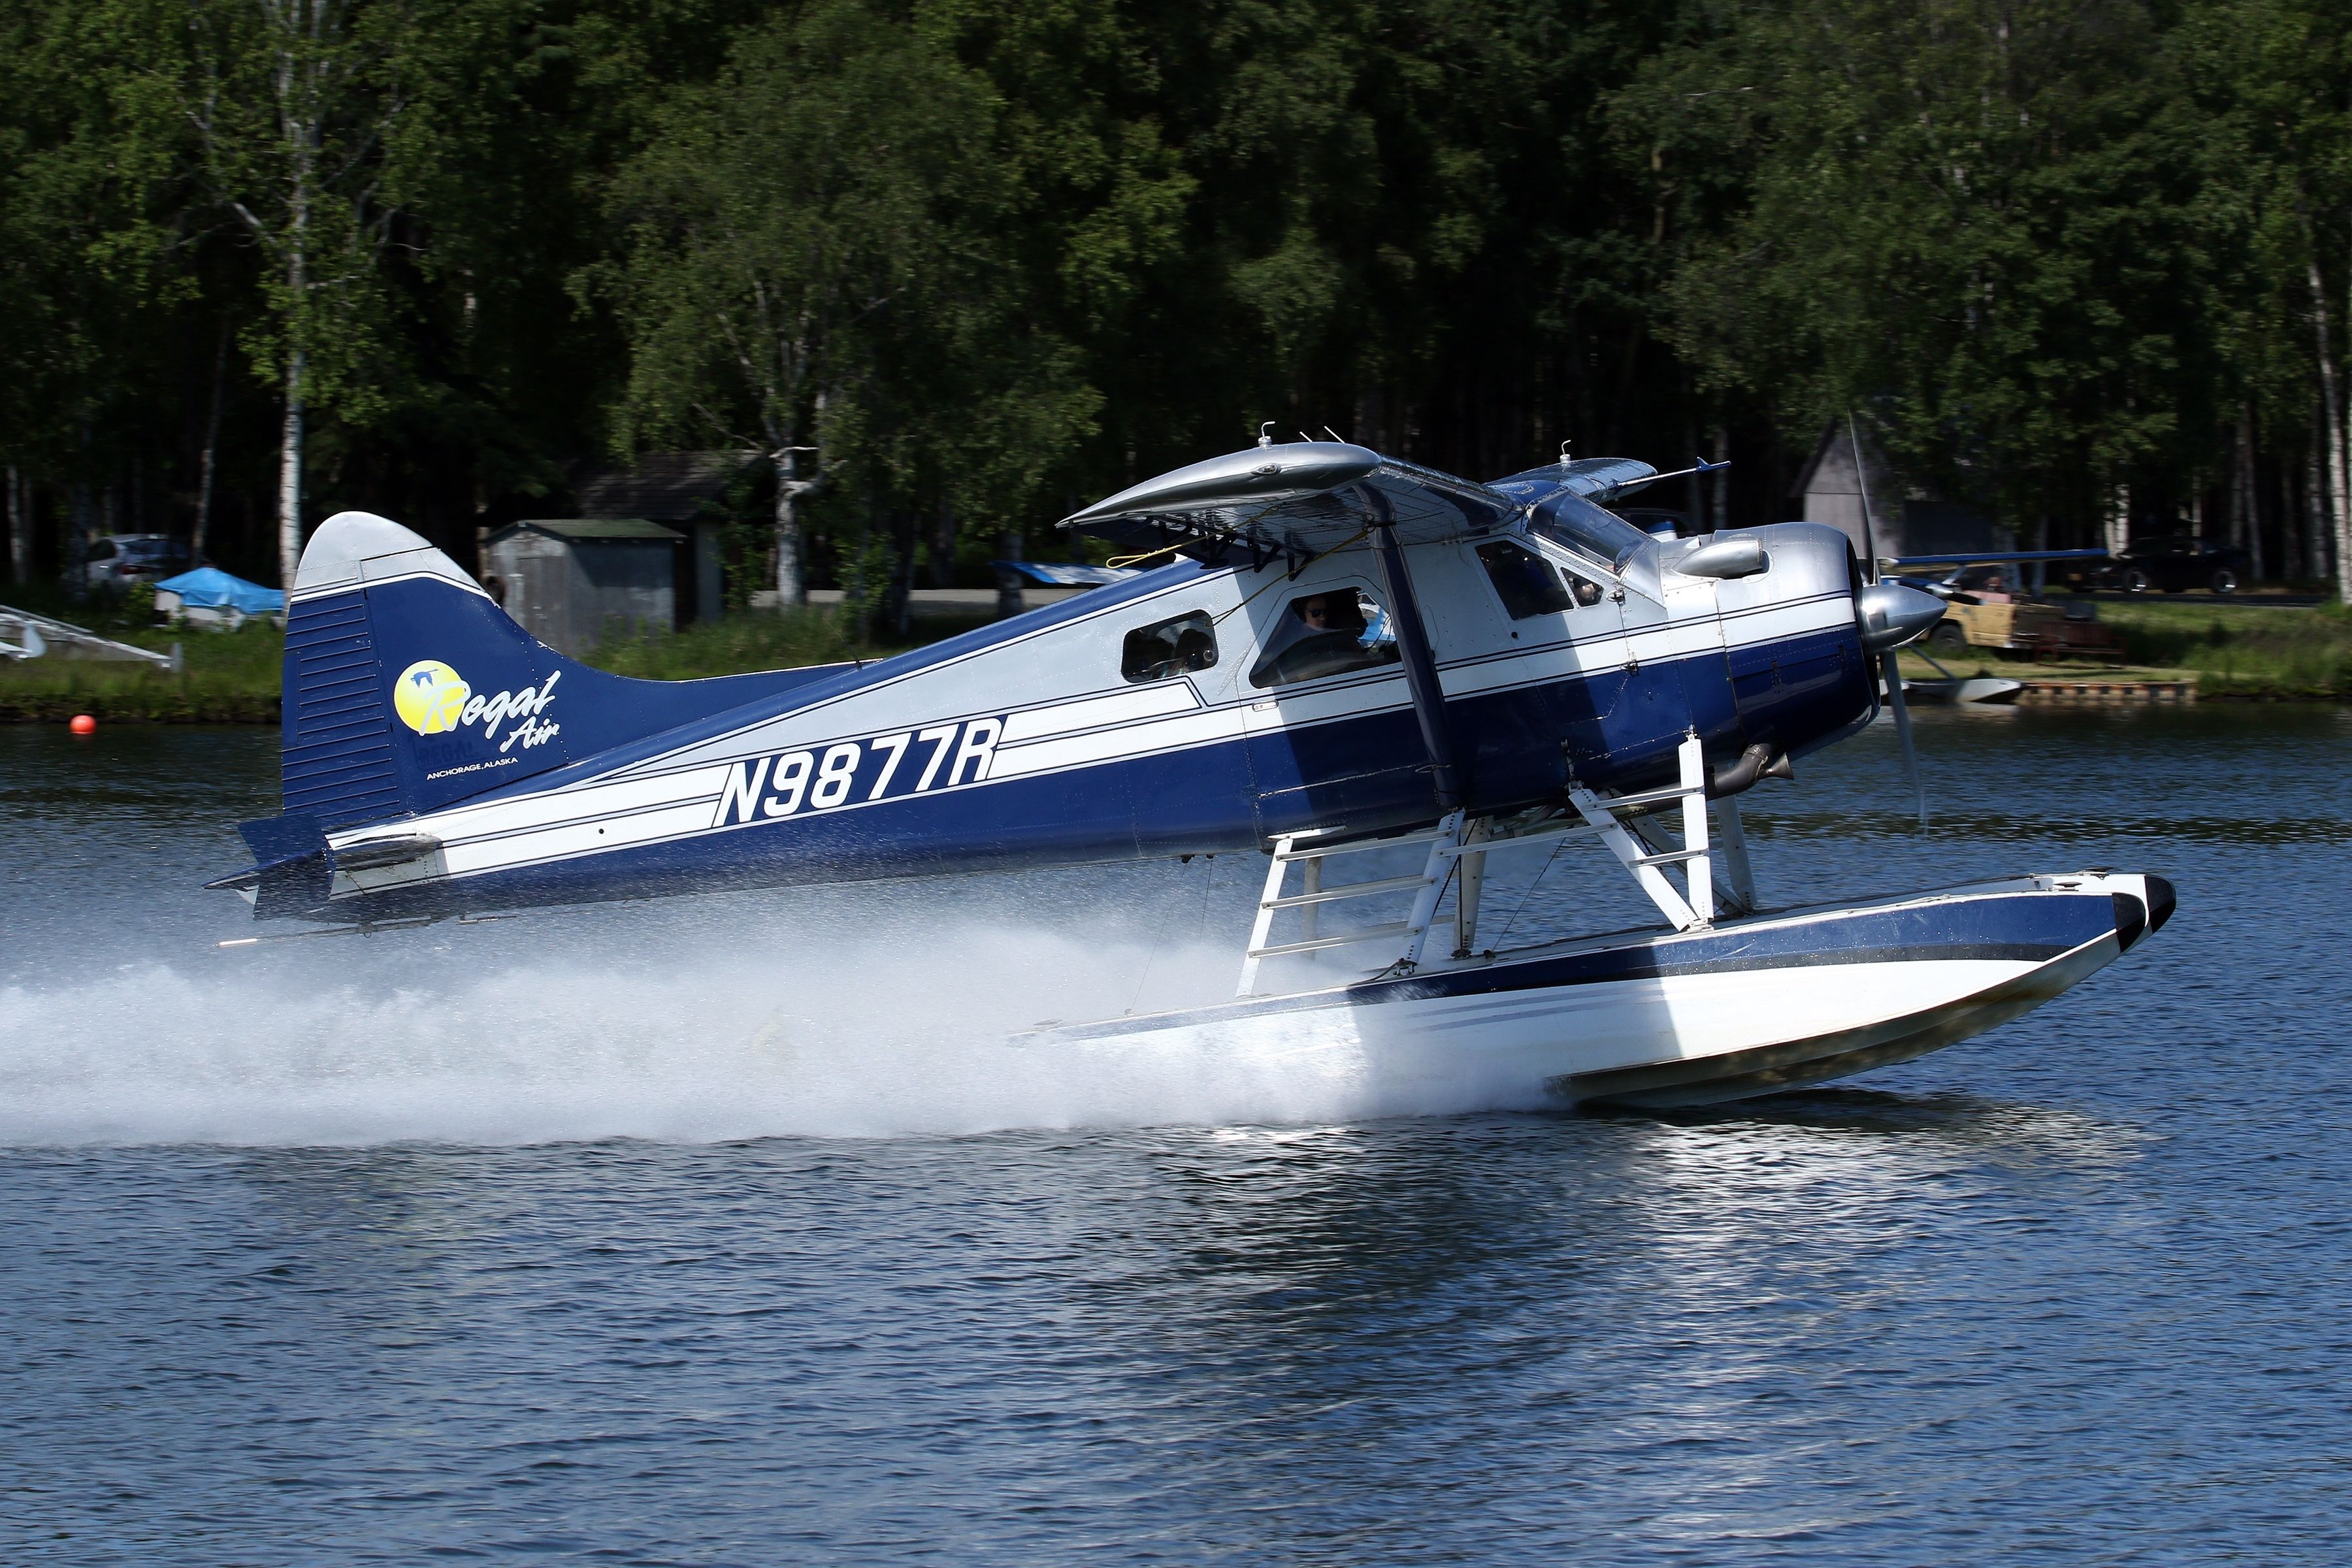 Anchorage, Alaska, USA - July 1 2018: deHavilland Canada DHC-2 Beaver floatplane operated by Regal Air taking off from Anchorage Lake Hood Seaplane Base.